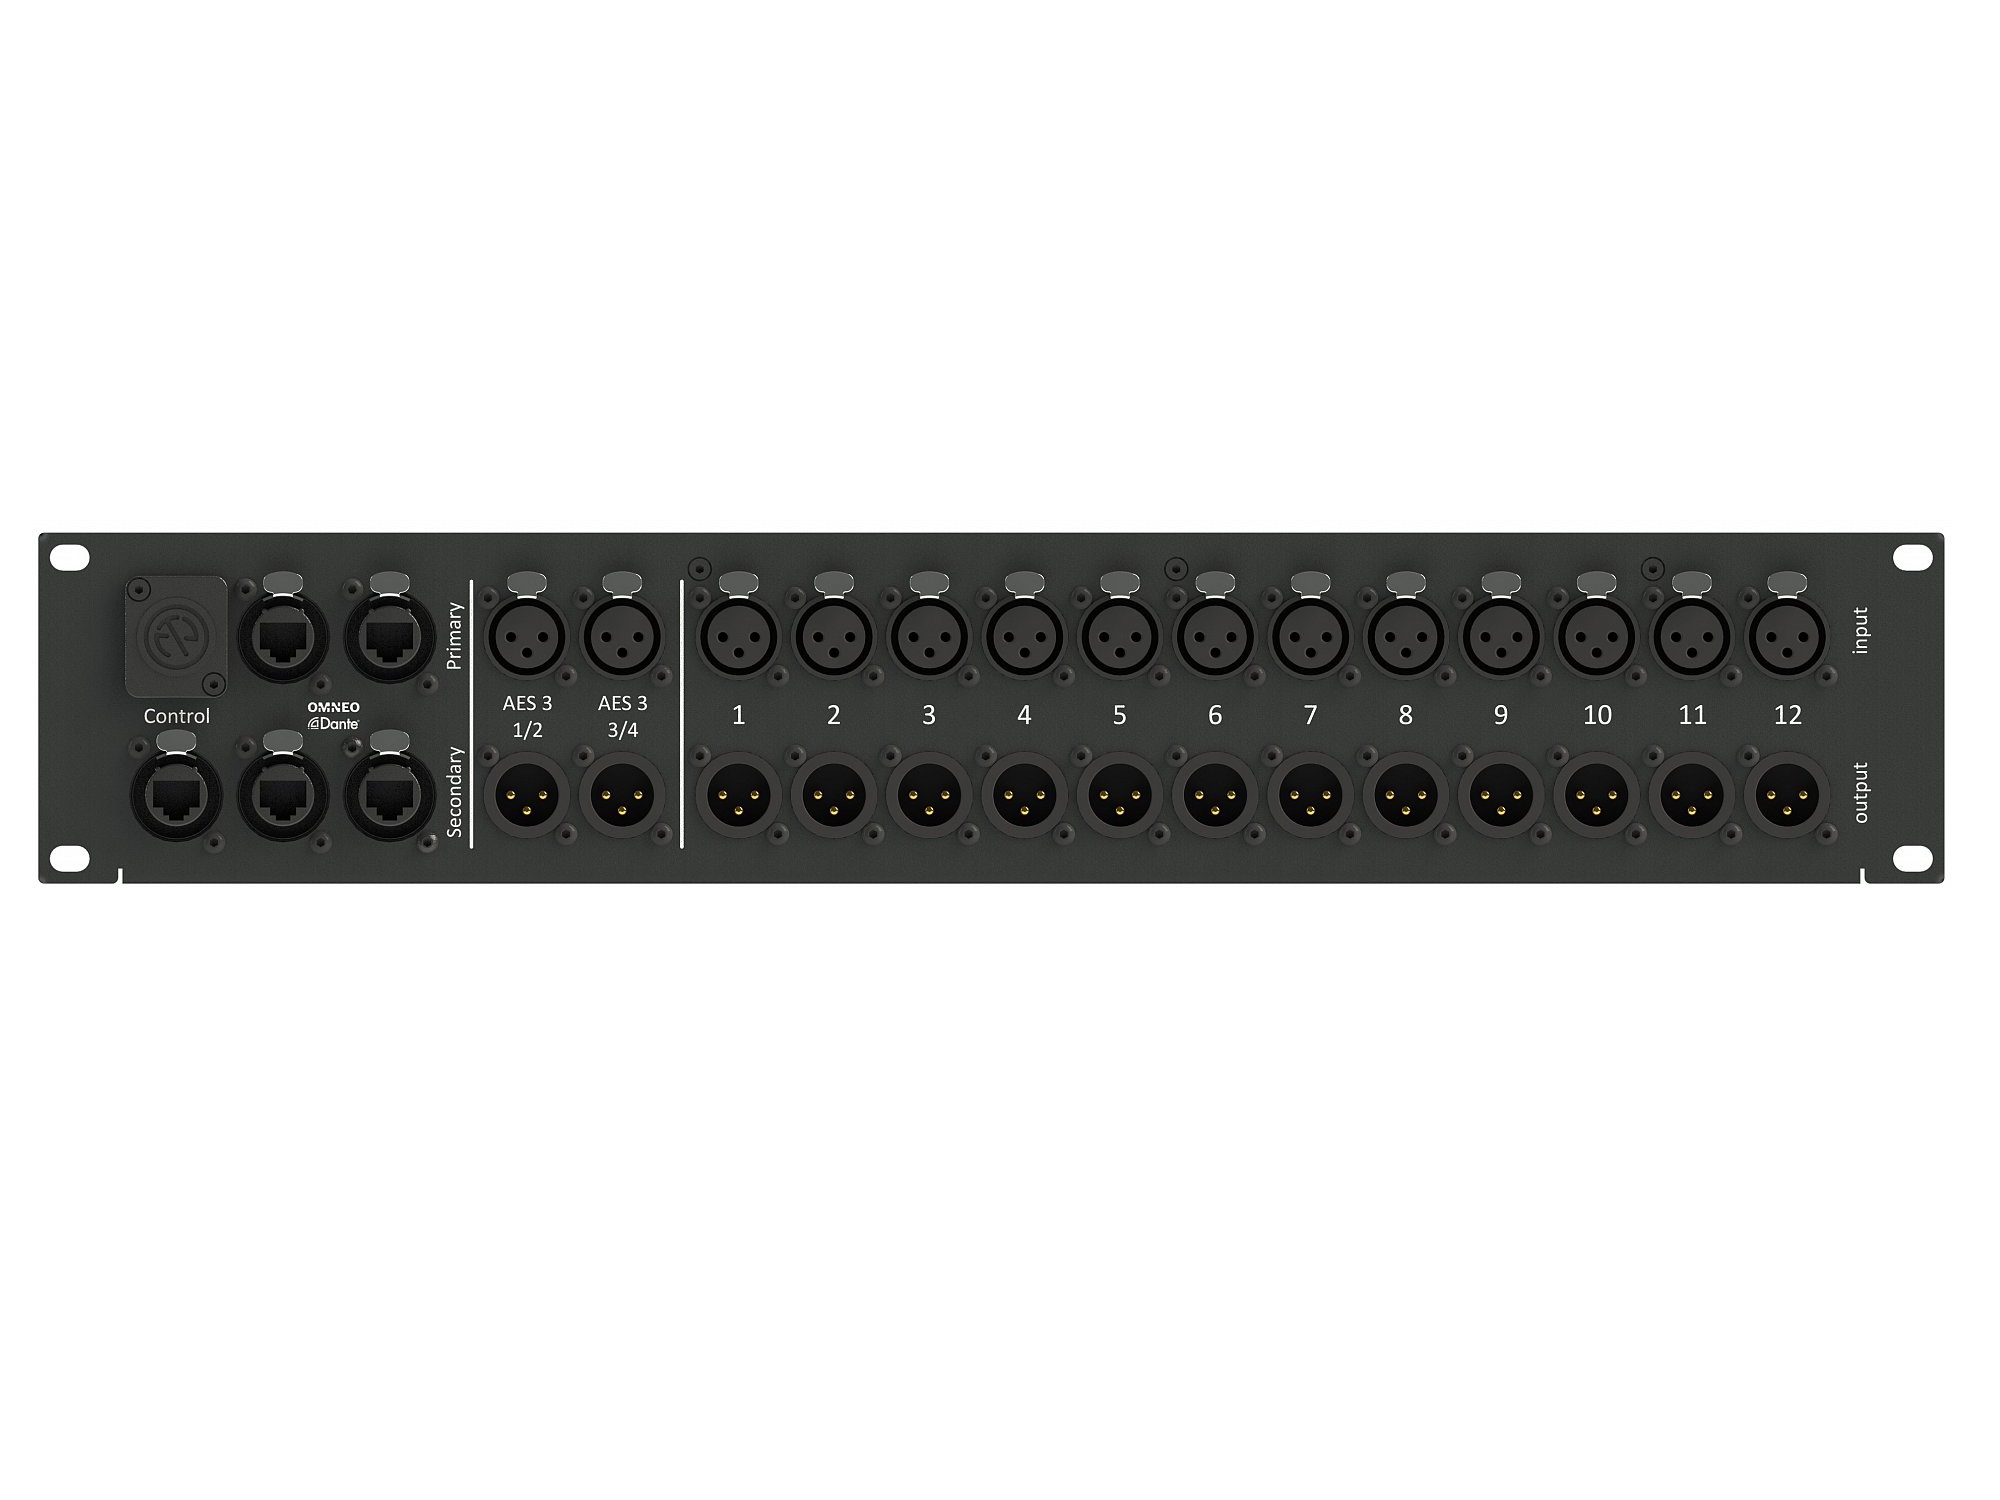 CP-MXE Professional connector panel for MXE by Electro-Voice